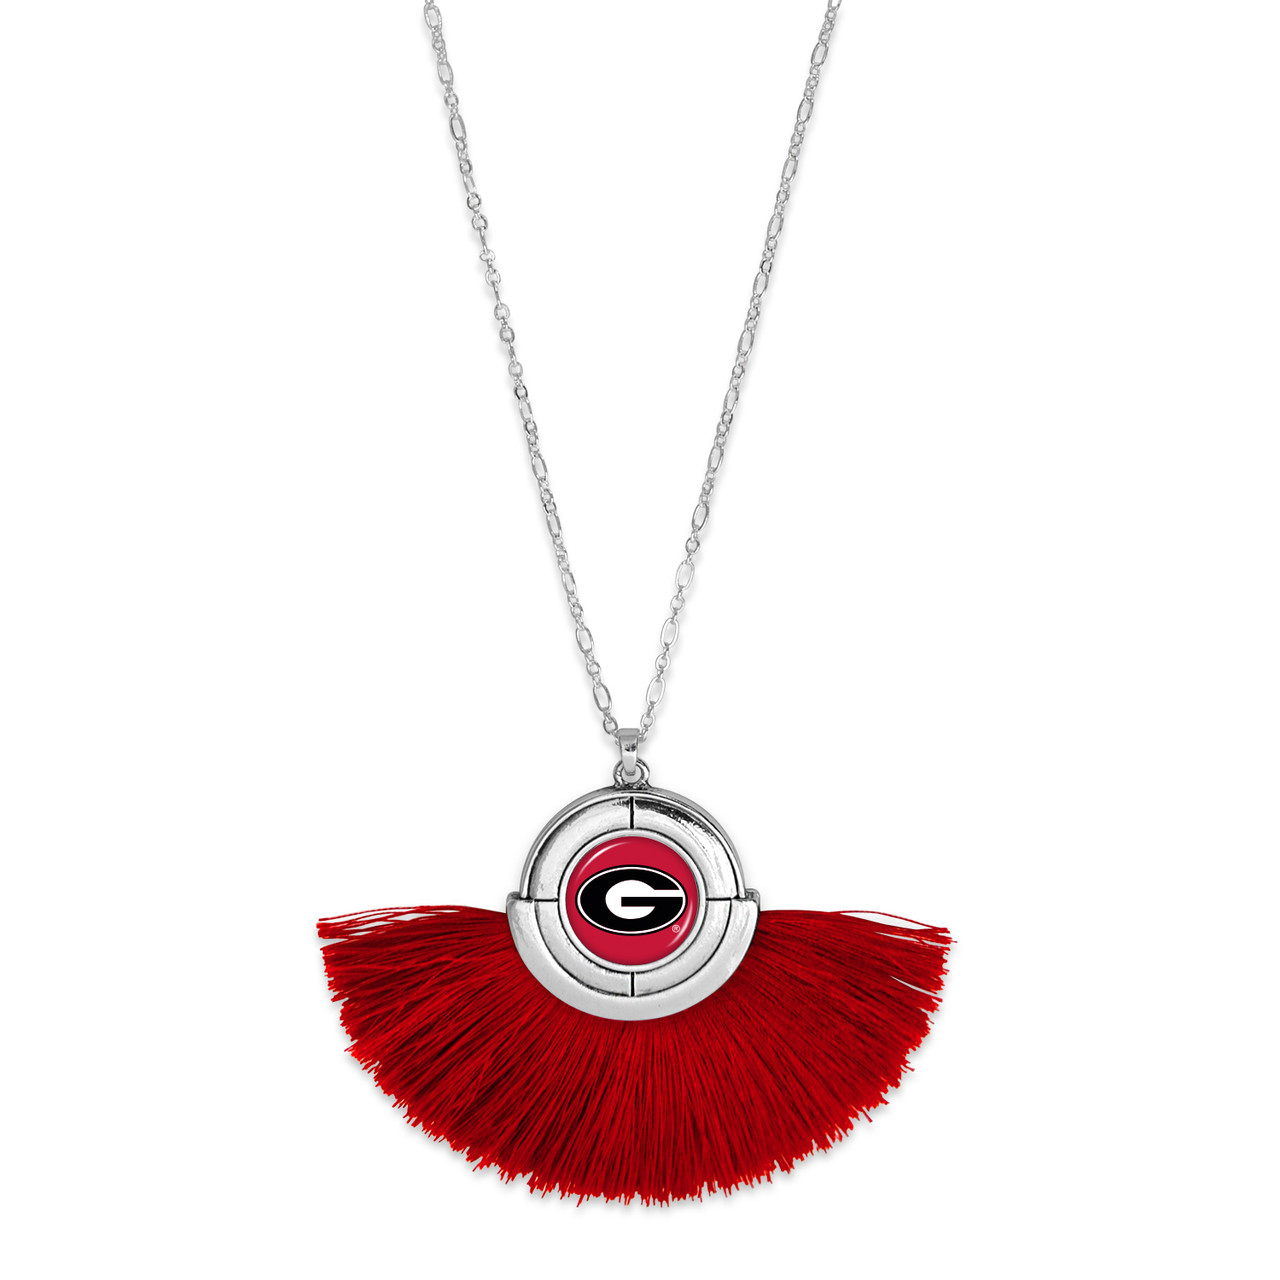 Georgia Bulldogs Necklace- No Strings Attached